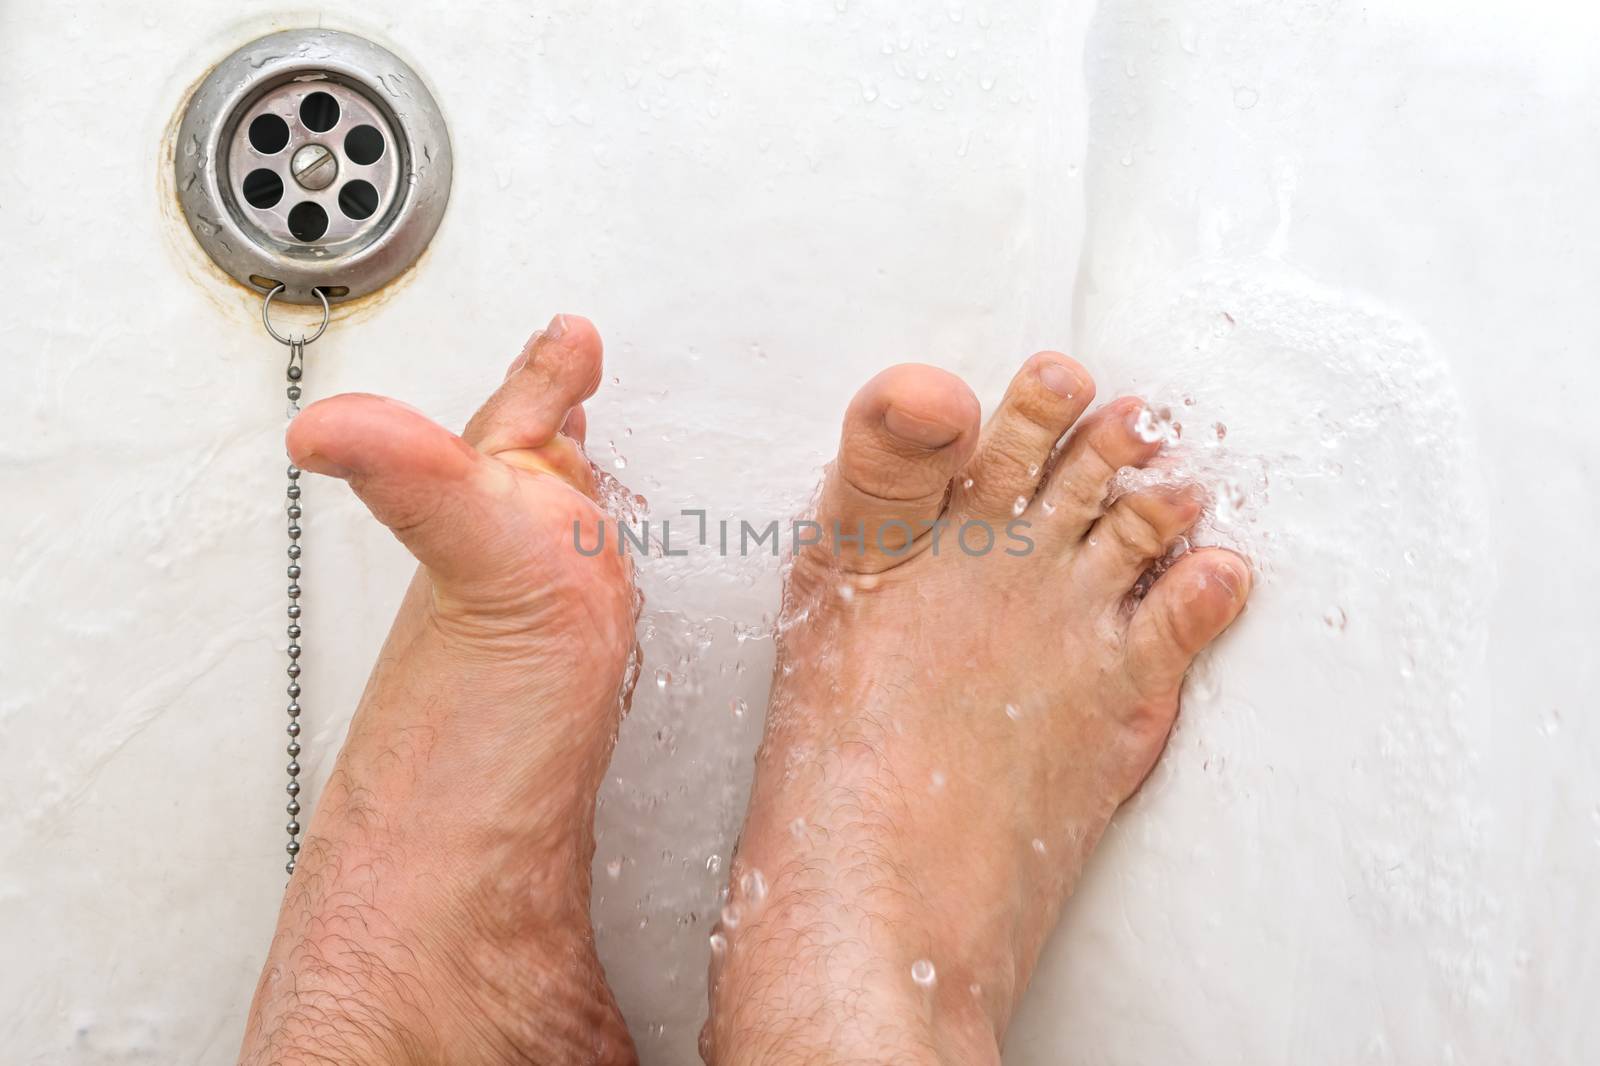 Washing feet in running water while lying in a bathroom close-up